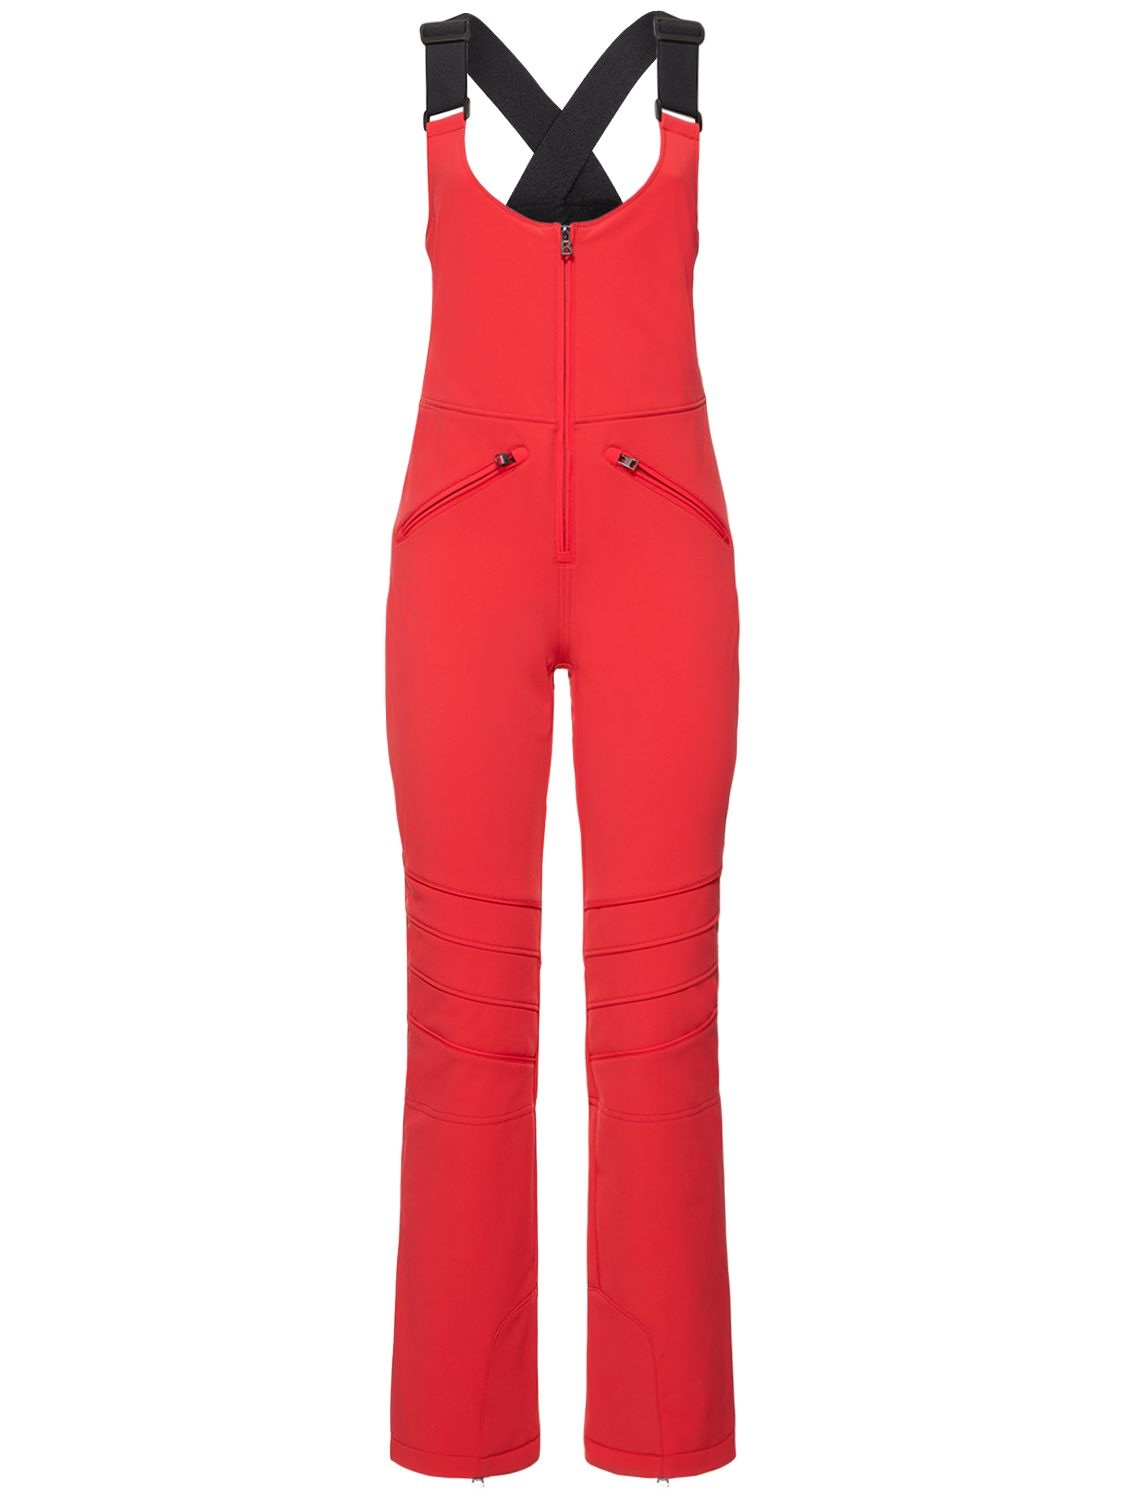 Cami Ski Suit – WOMEN > CLOTHING > JUMPSUITS & ROMPERS